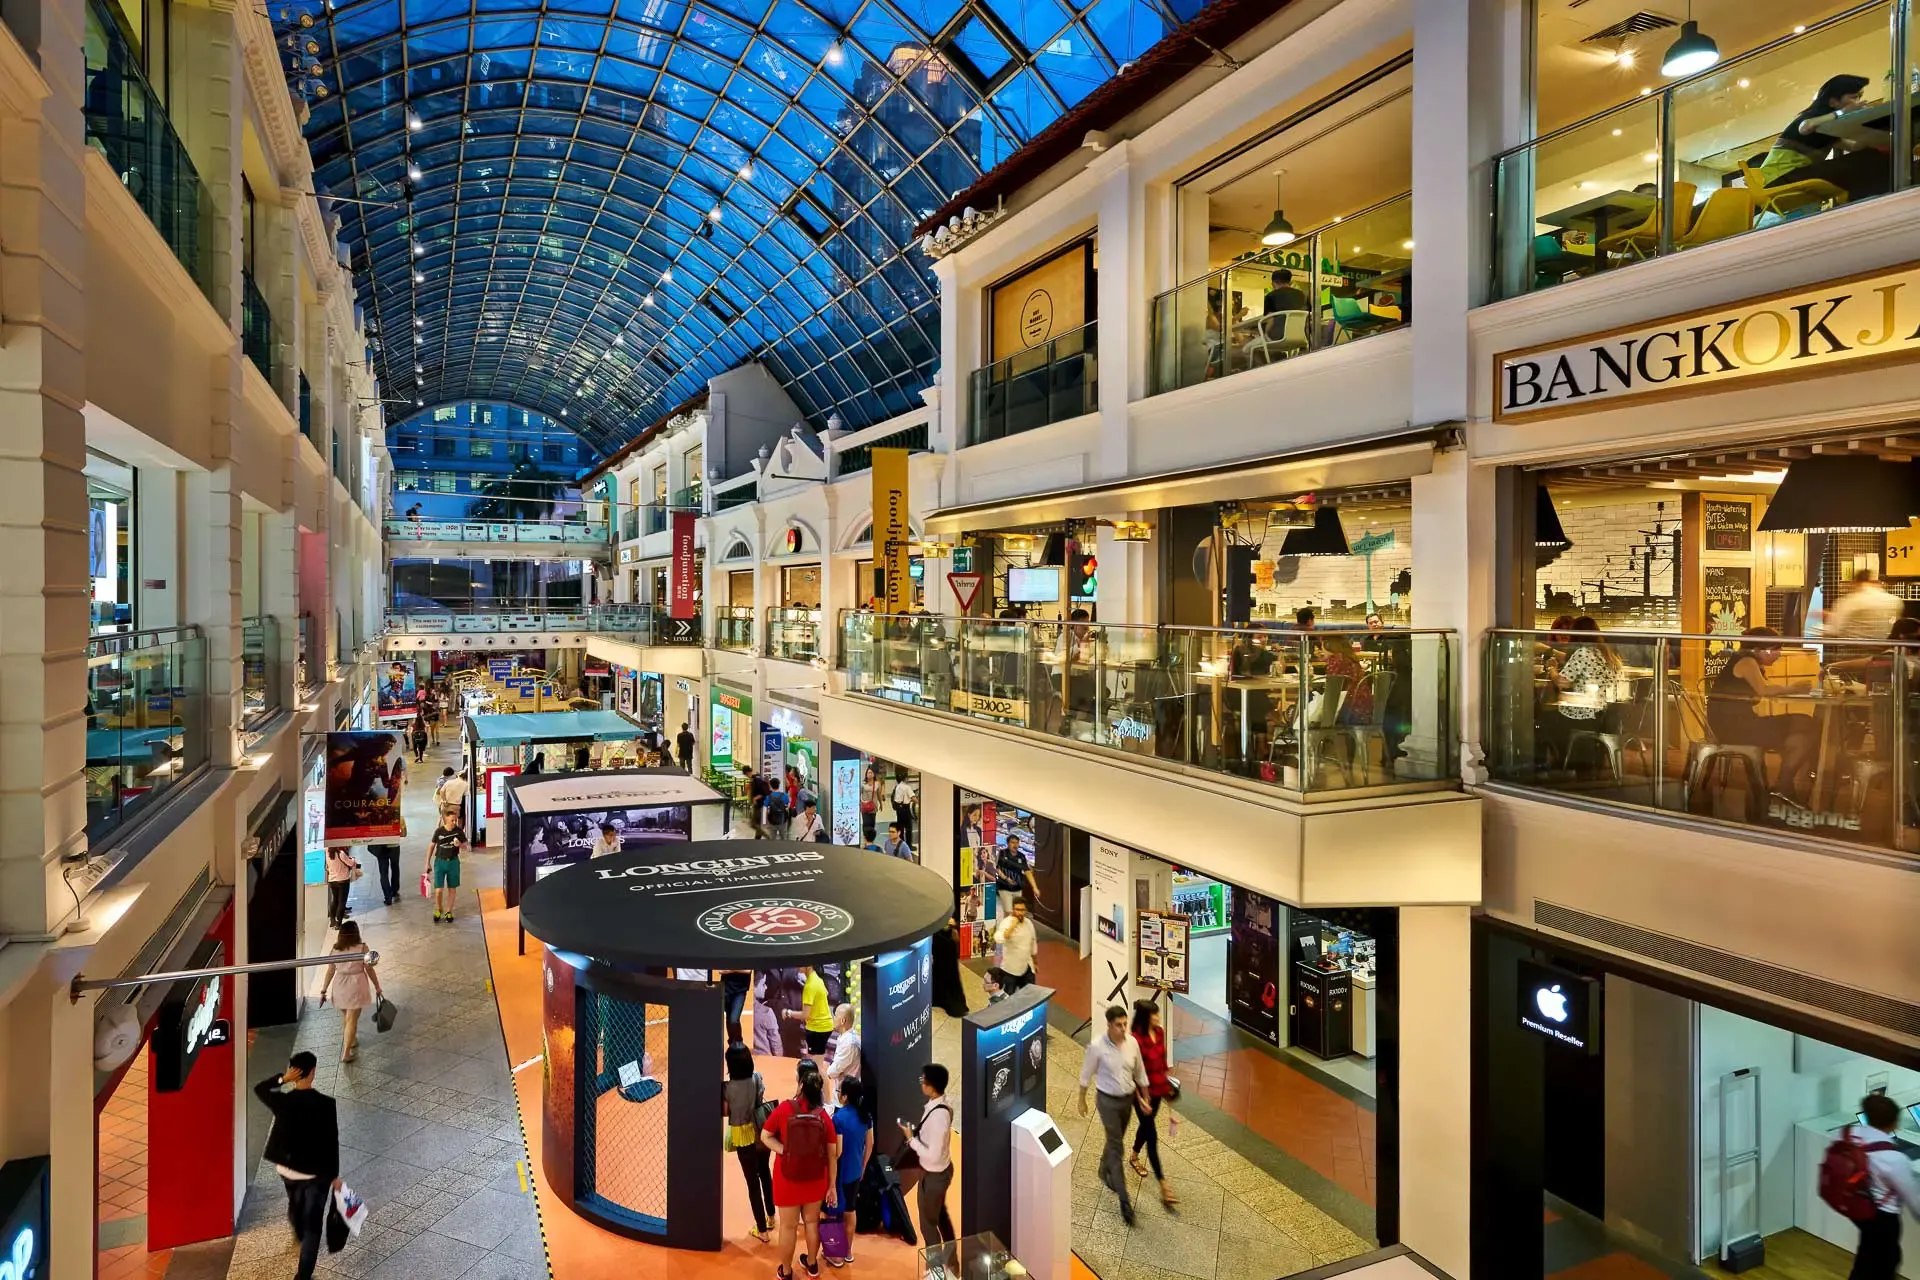 Bugis Junction in Singapore, central_asia | Shoes,Clothes,Gifts,Cosmetics,Jewelry,Swimwear - Country Helper